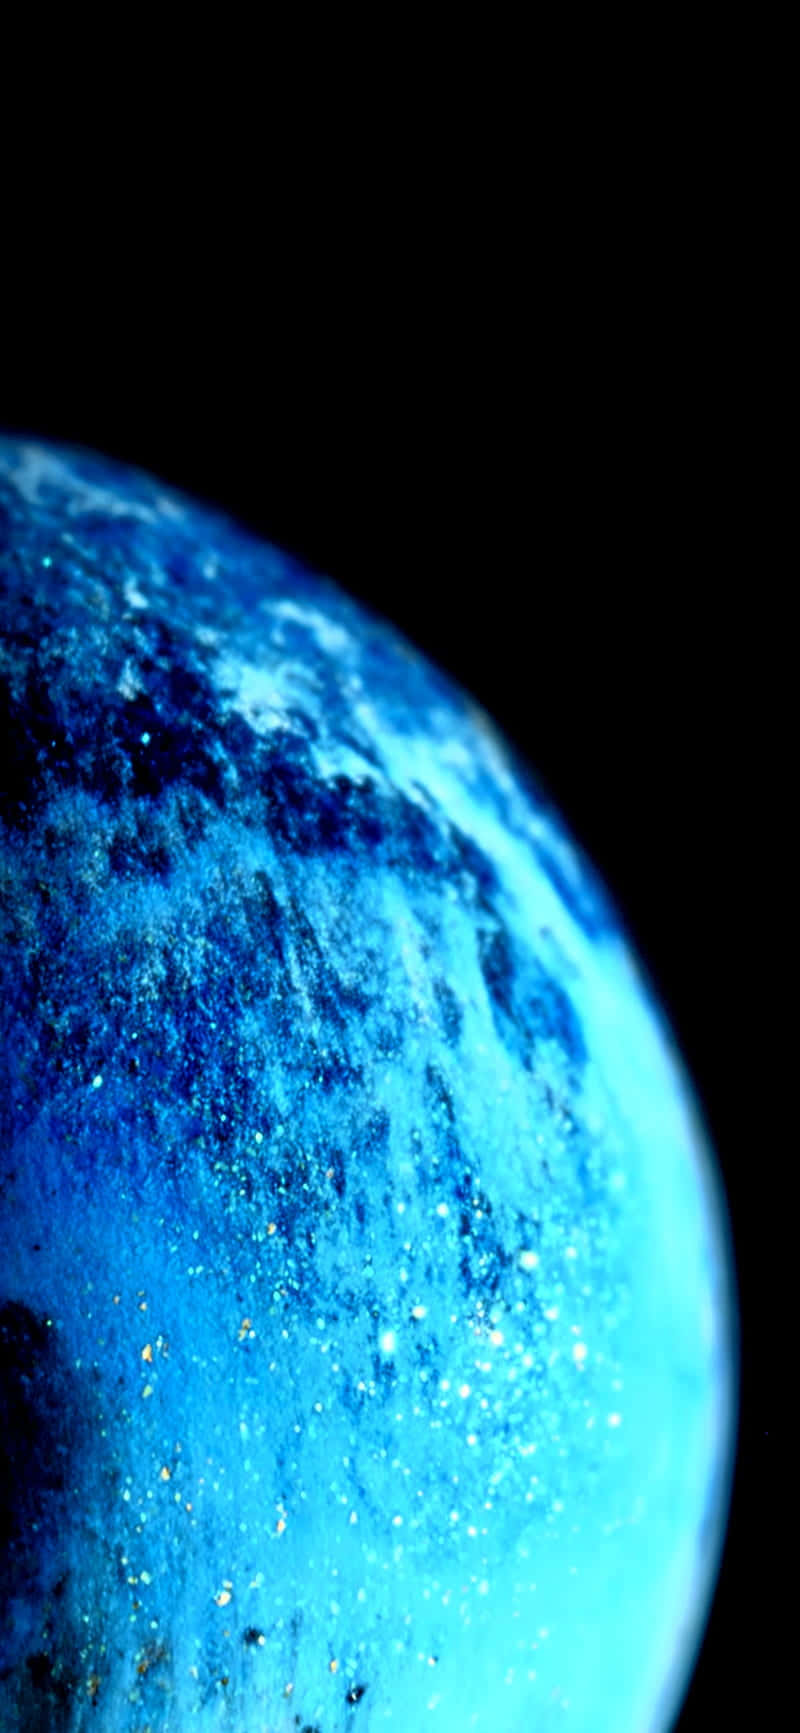 A Blue Planet With A Black Background Wallpaper